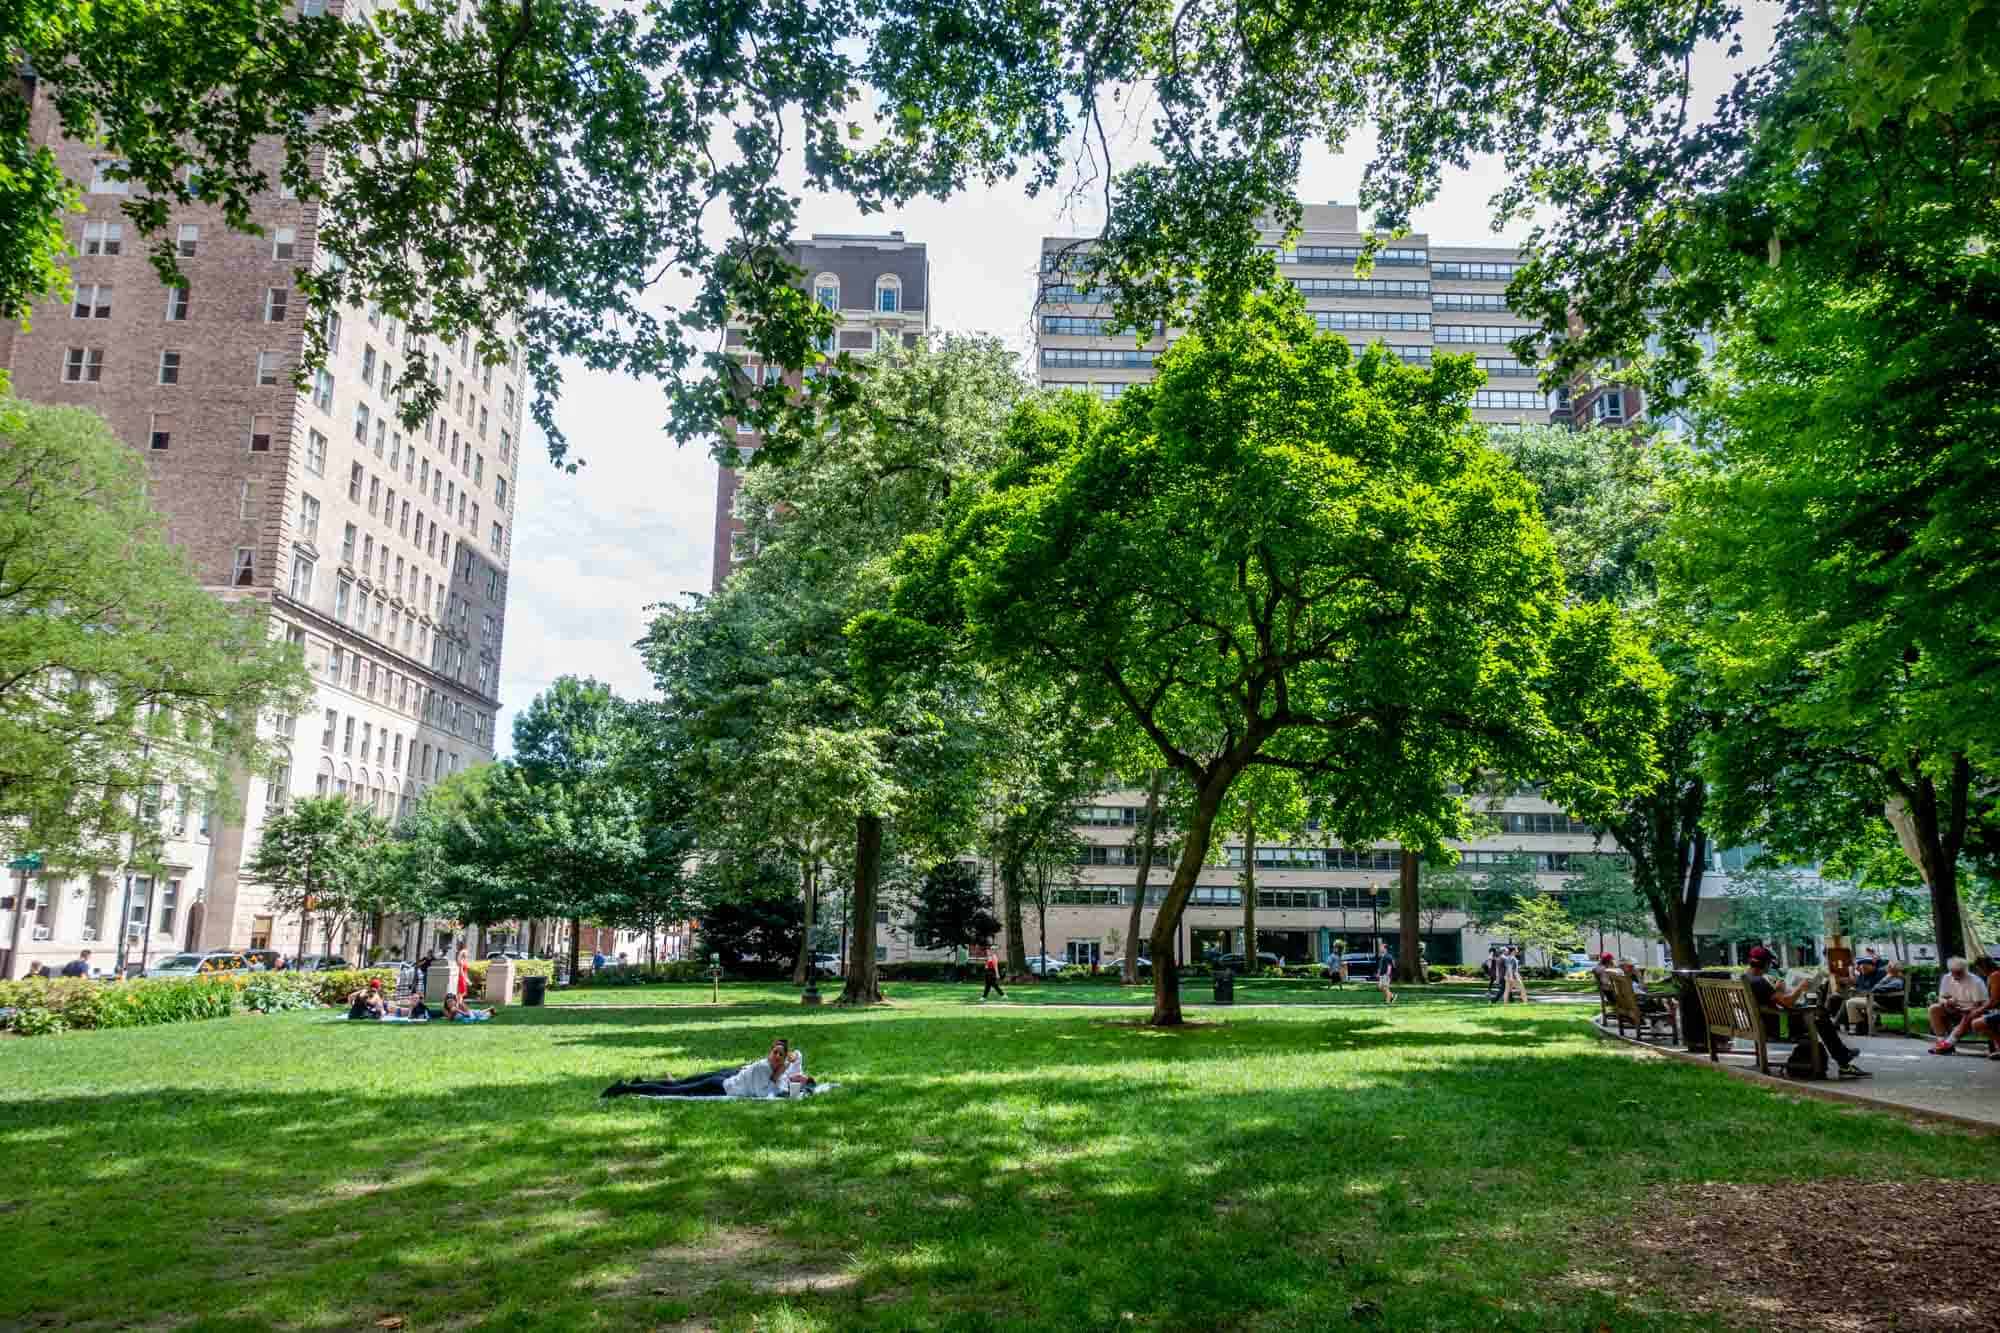 People relaxing in a city park surrounded by high-rise buildings